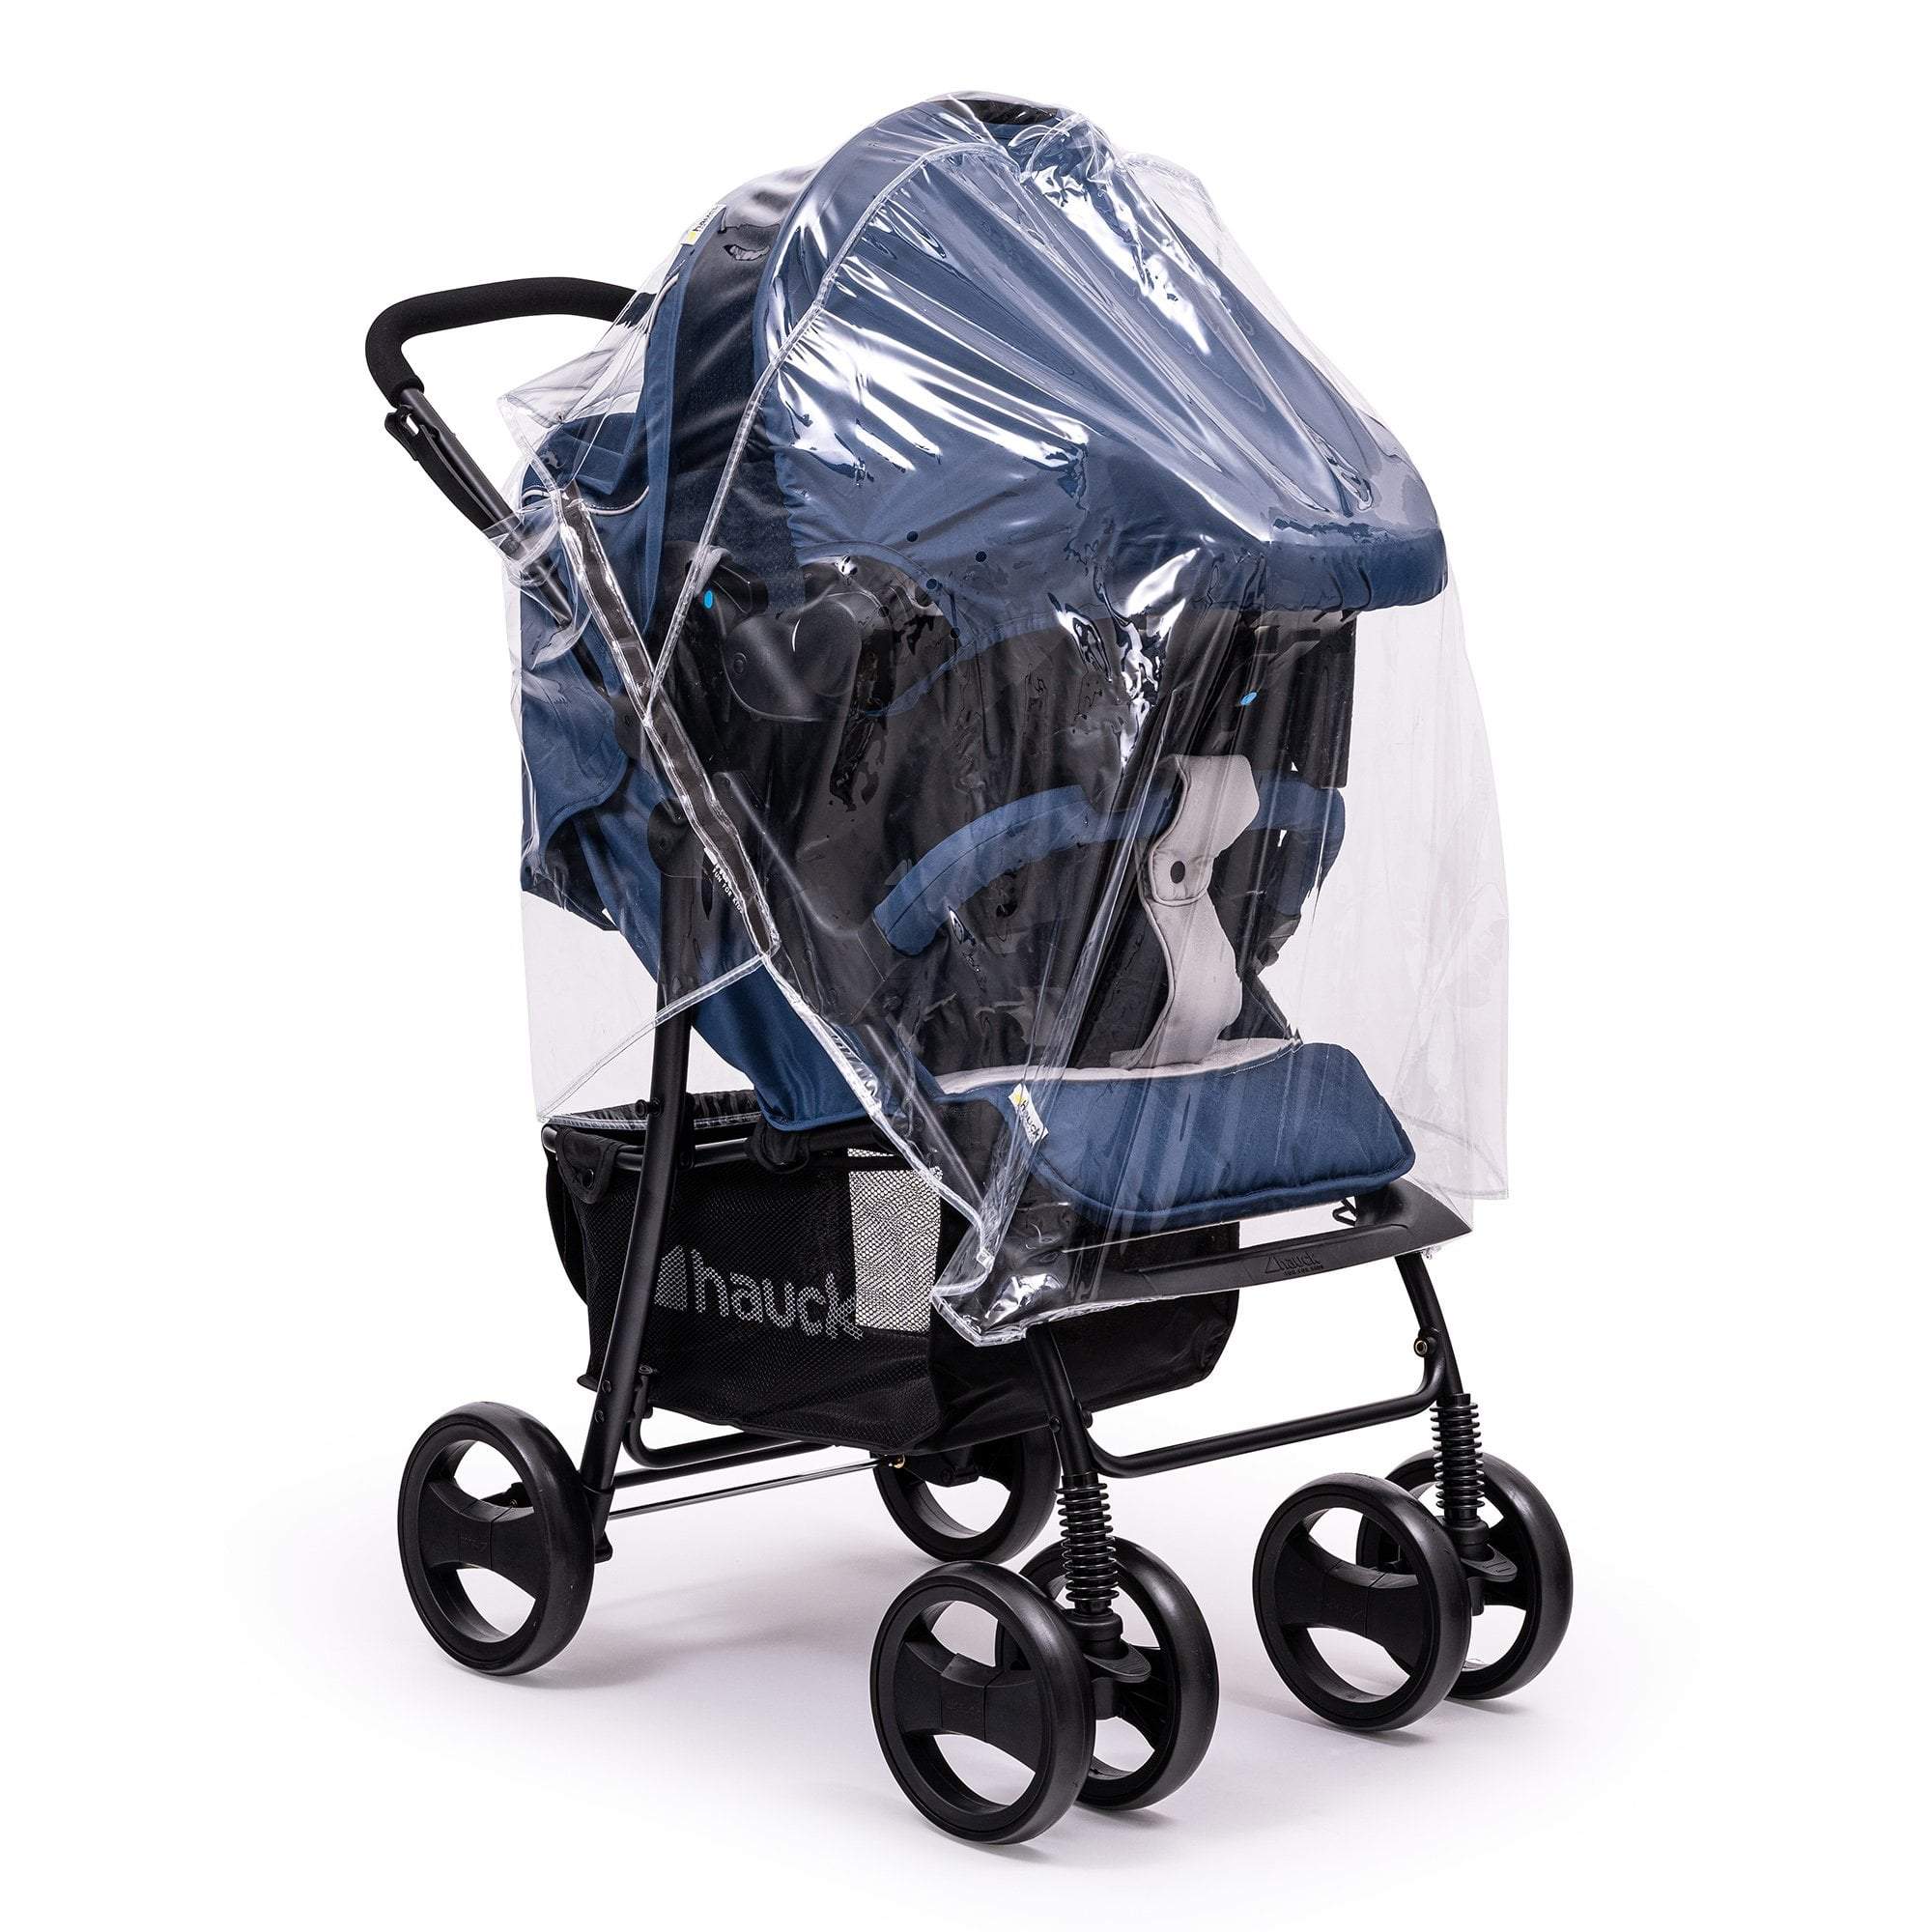 Travel System Raincover Compatible with Hauck - Fits All Models - For Your Little One